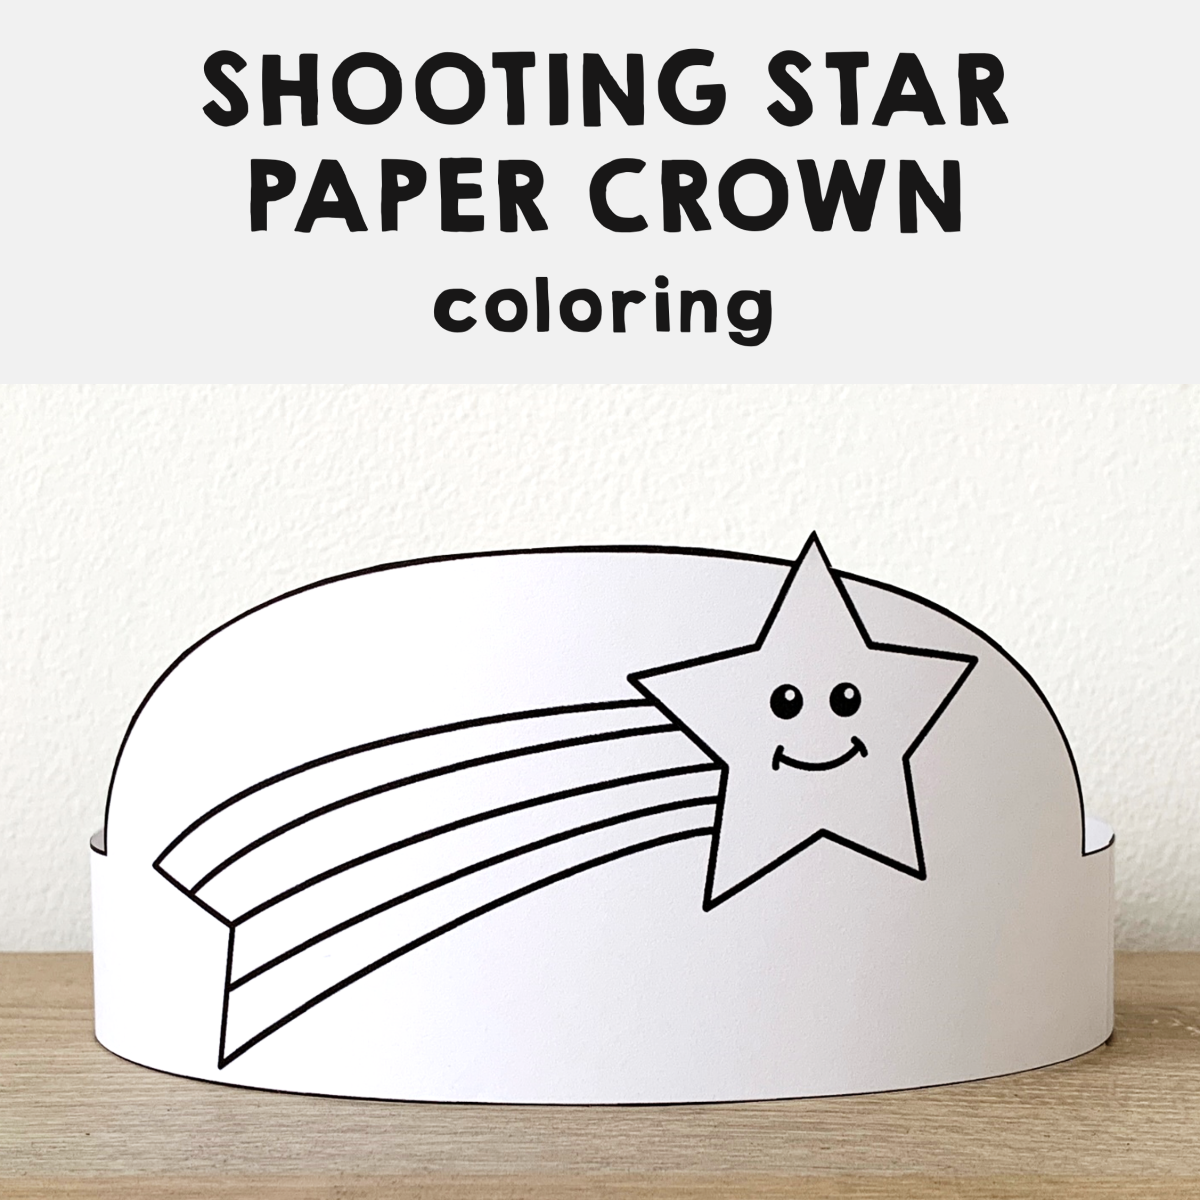 Shooting star paper crown printable astronomy weather coloring craft made by teachers